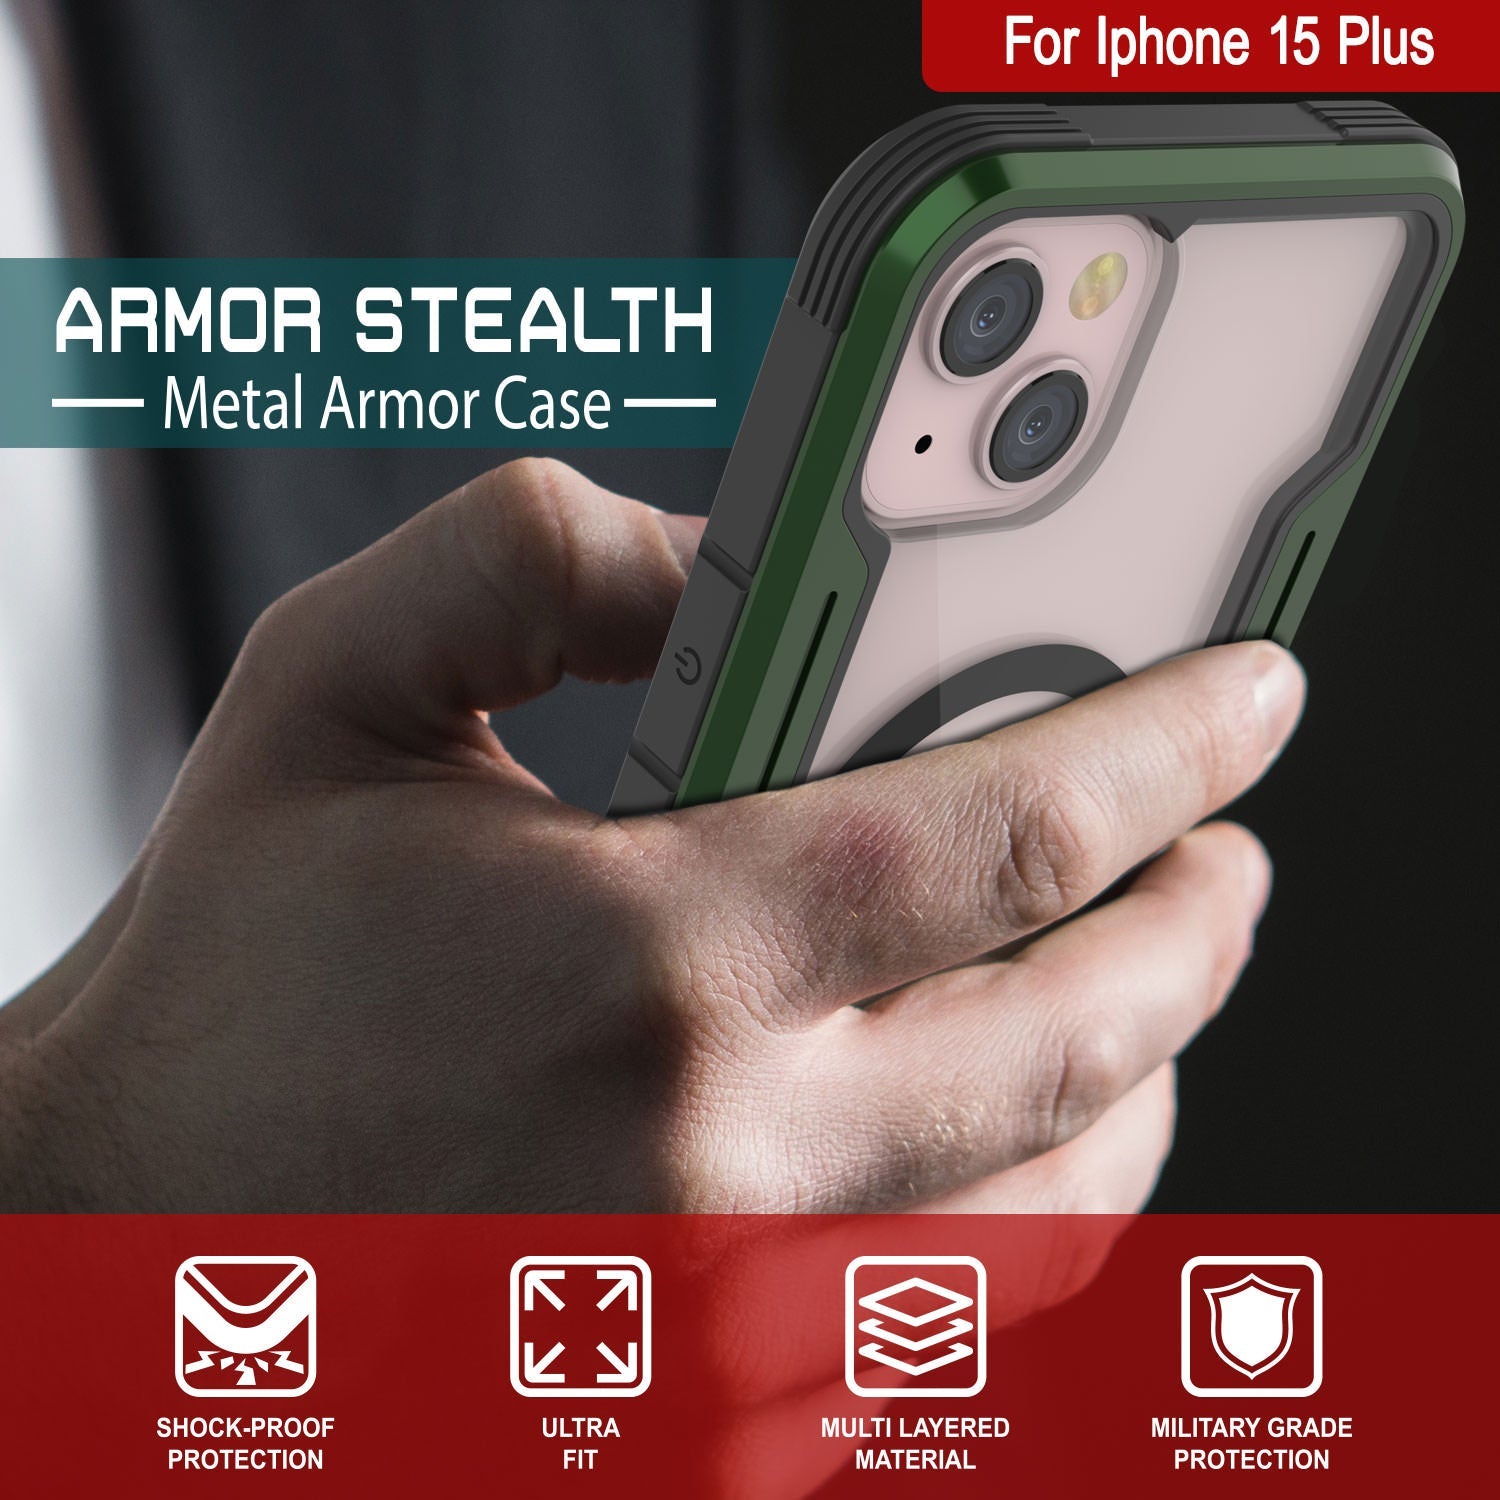 Punkcase iPhone 15 Plus Armor Stealth MAG Defense Case Protective Military Grade Multilayer Cover [Dark Green]